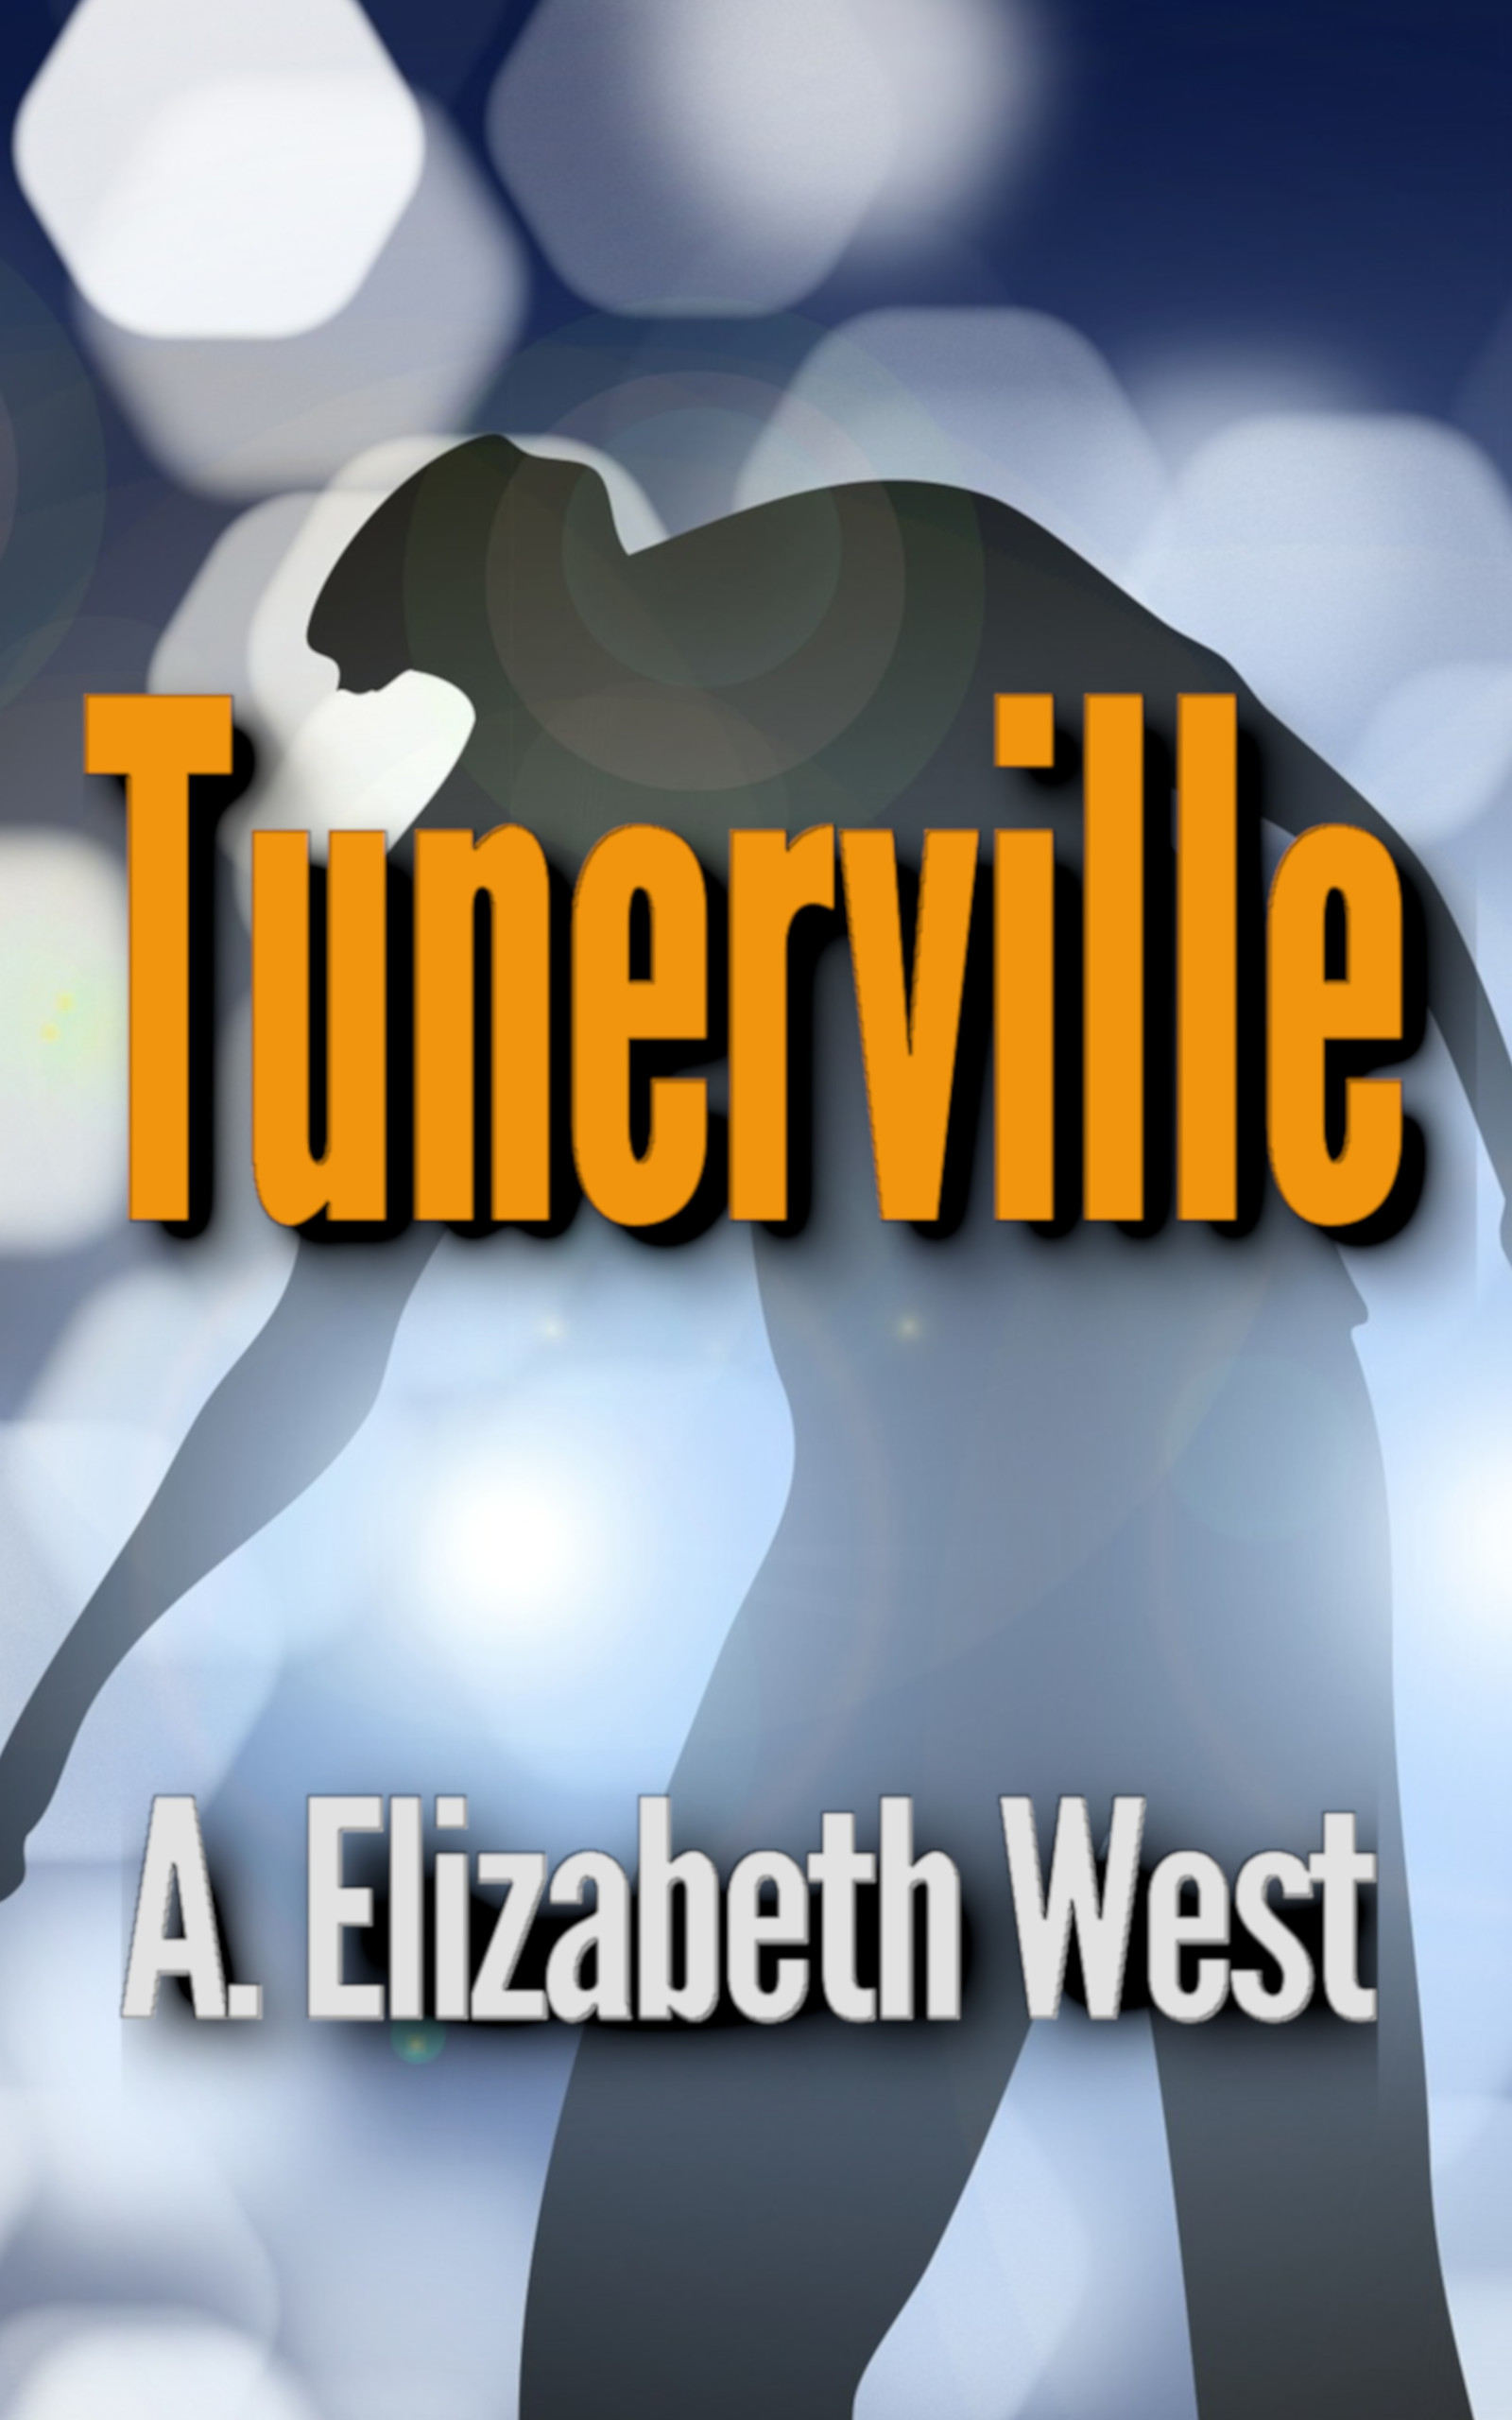 Tunerville book cover shows a shadowy figure on a blue field of hexagonal lights and a title in orange font. Author name below title in white font.